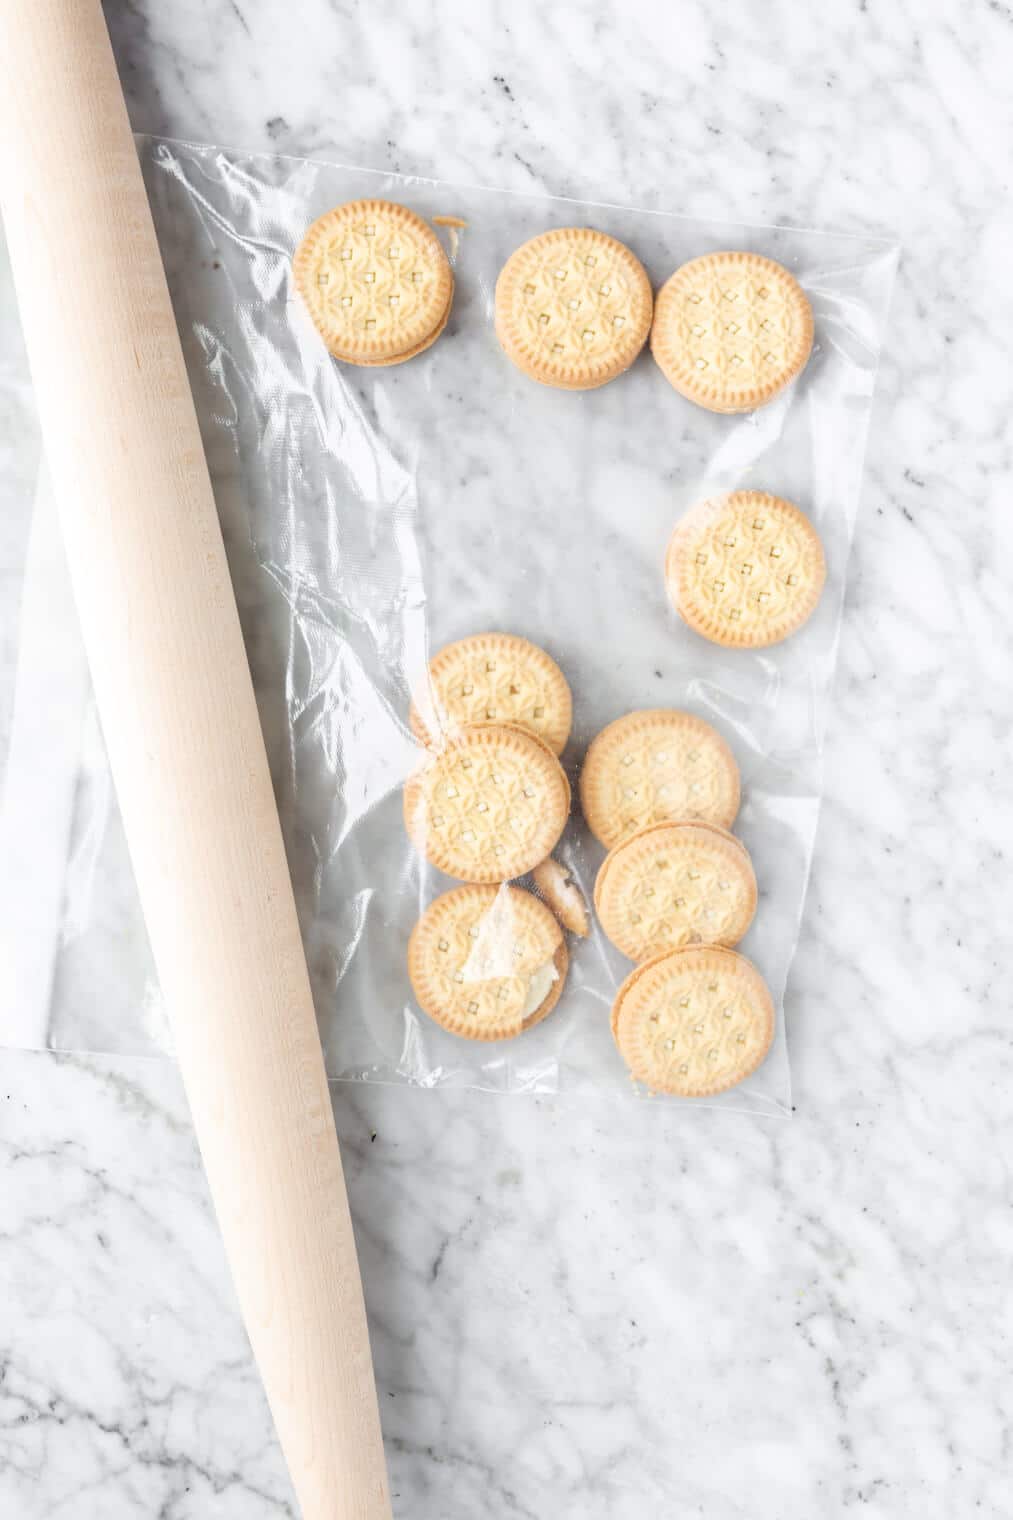 Rolling pin next to a plastic bag full of vanilla, cream filled cookies.